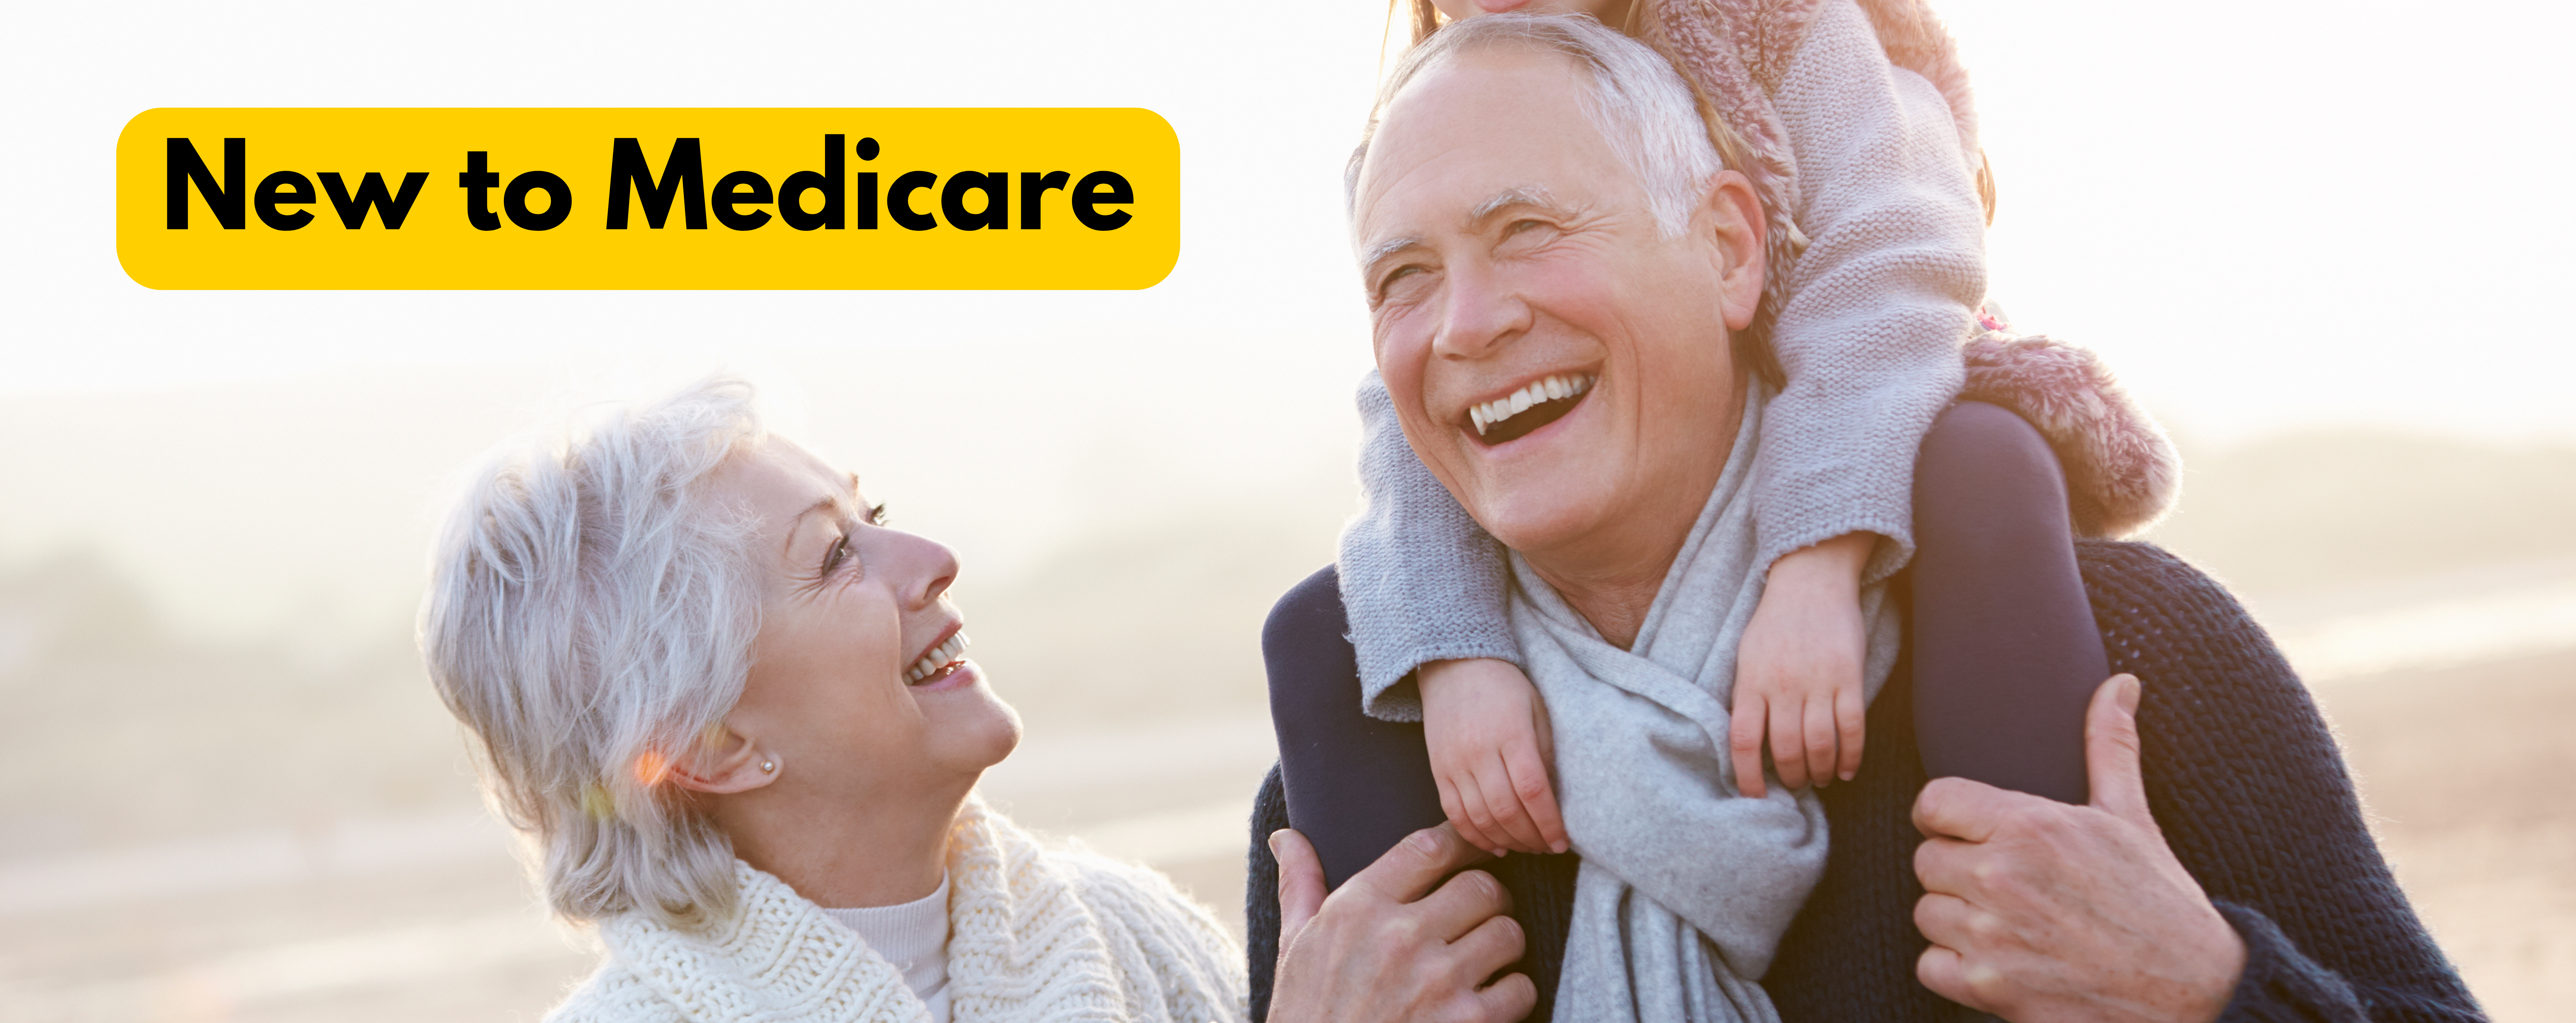 New to Medicare (2)